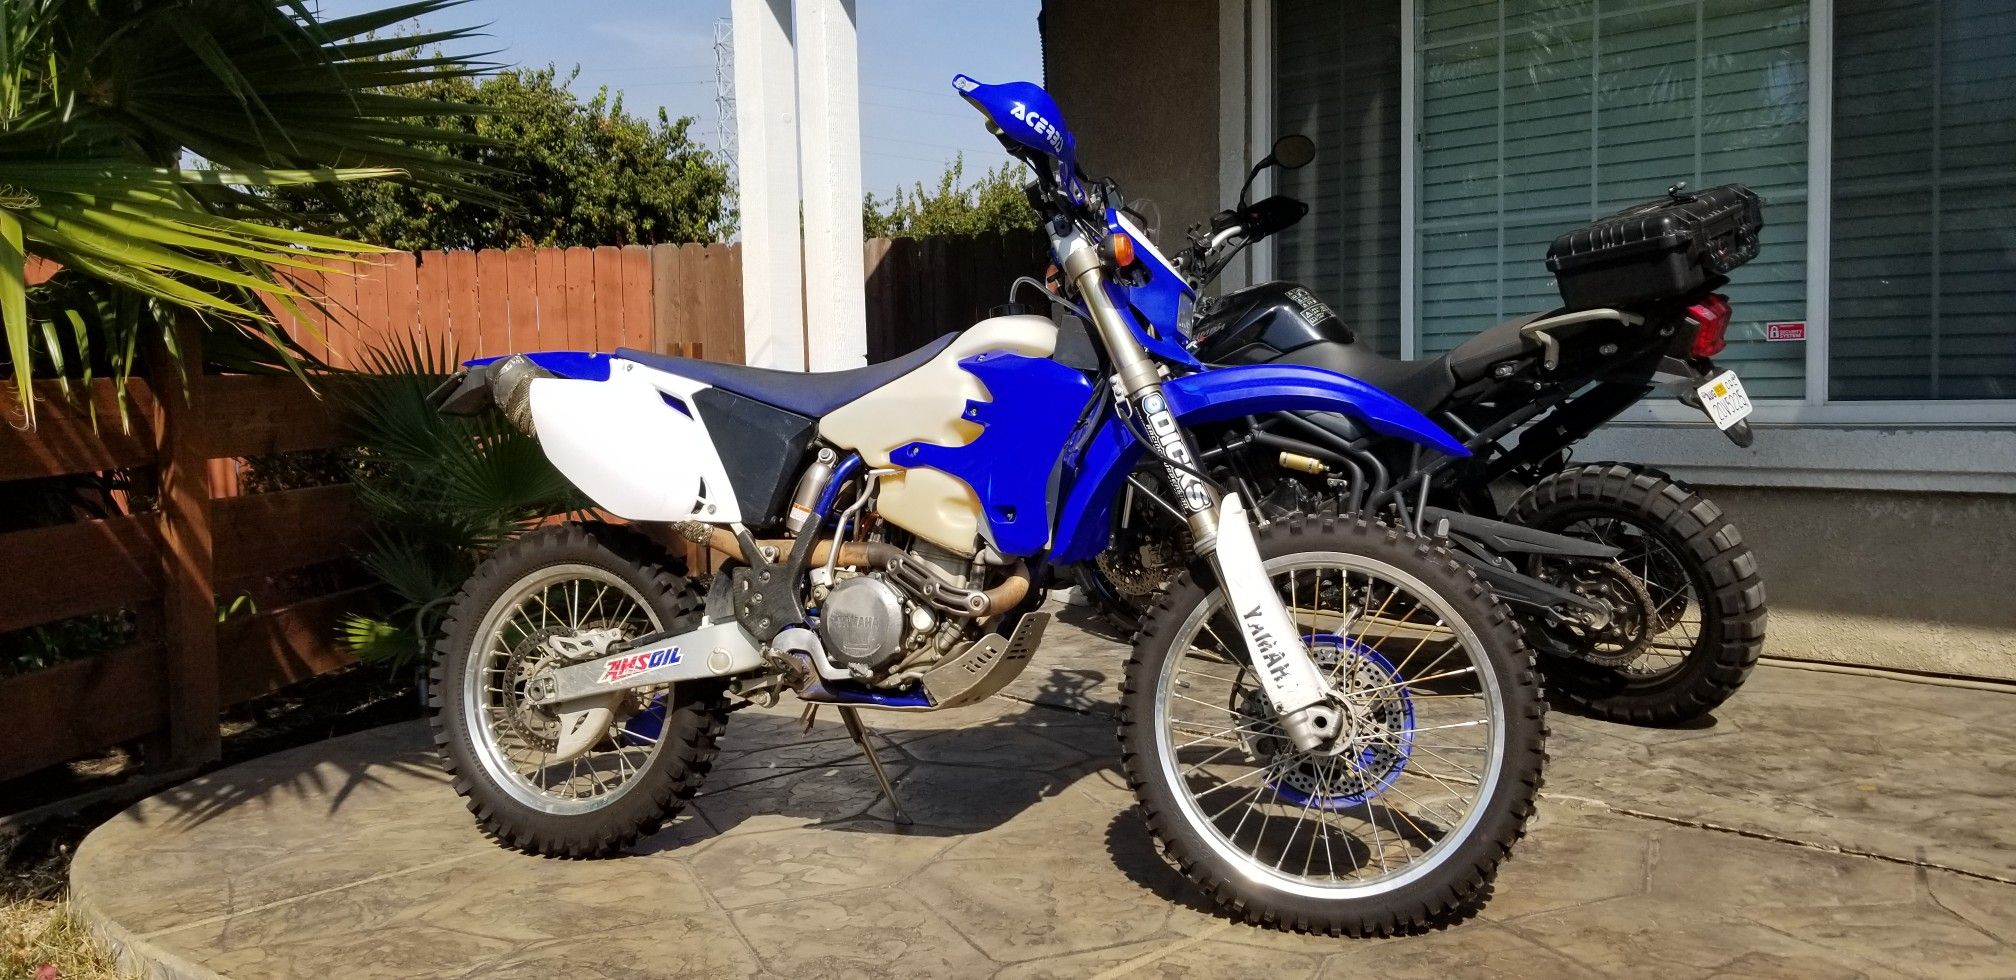 2006 Yamaha WR450f, street legal/plated, upgraded